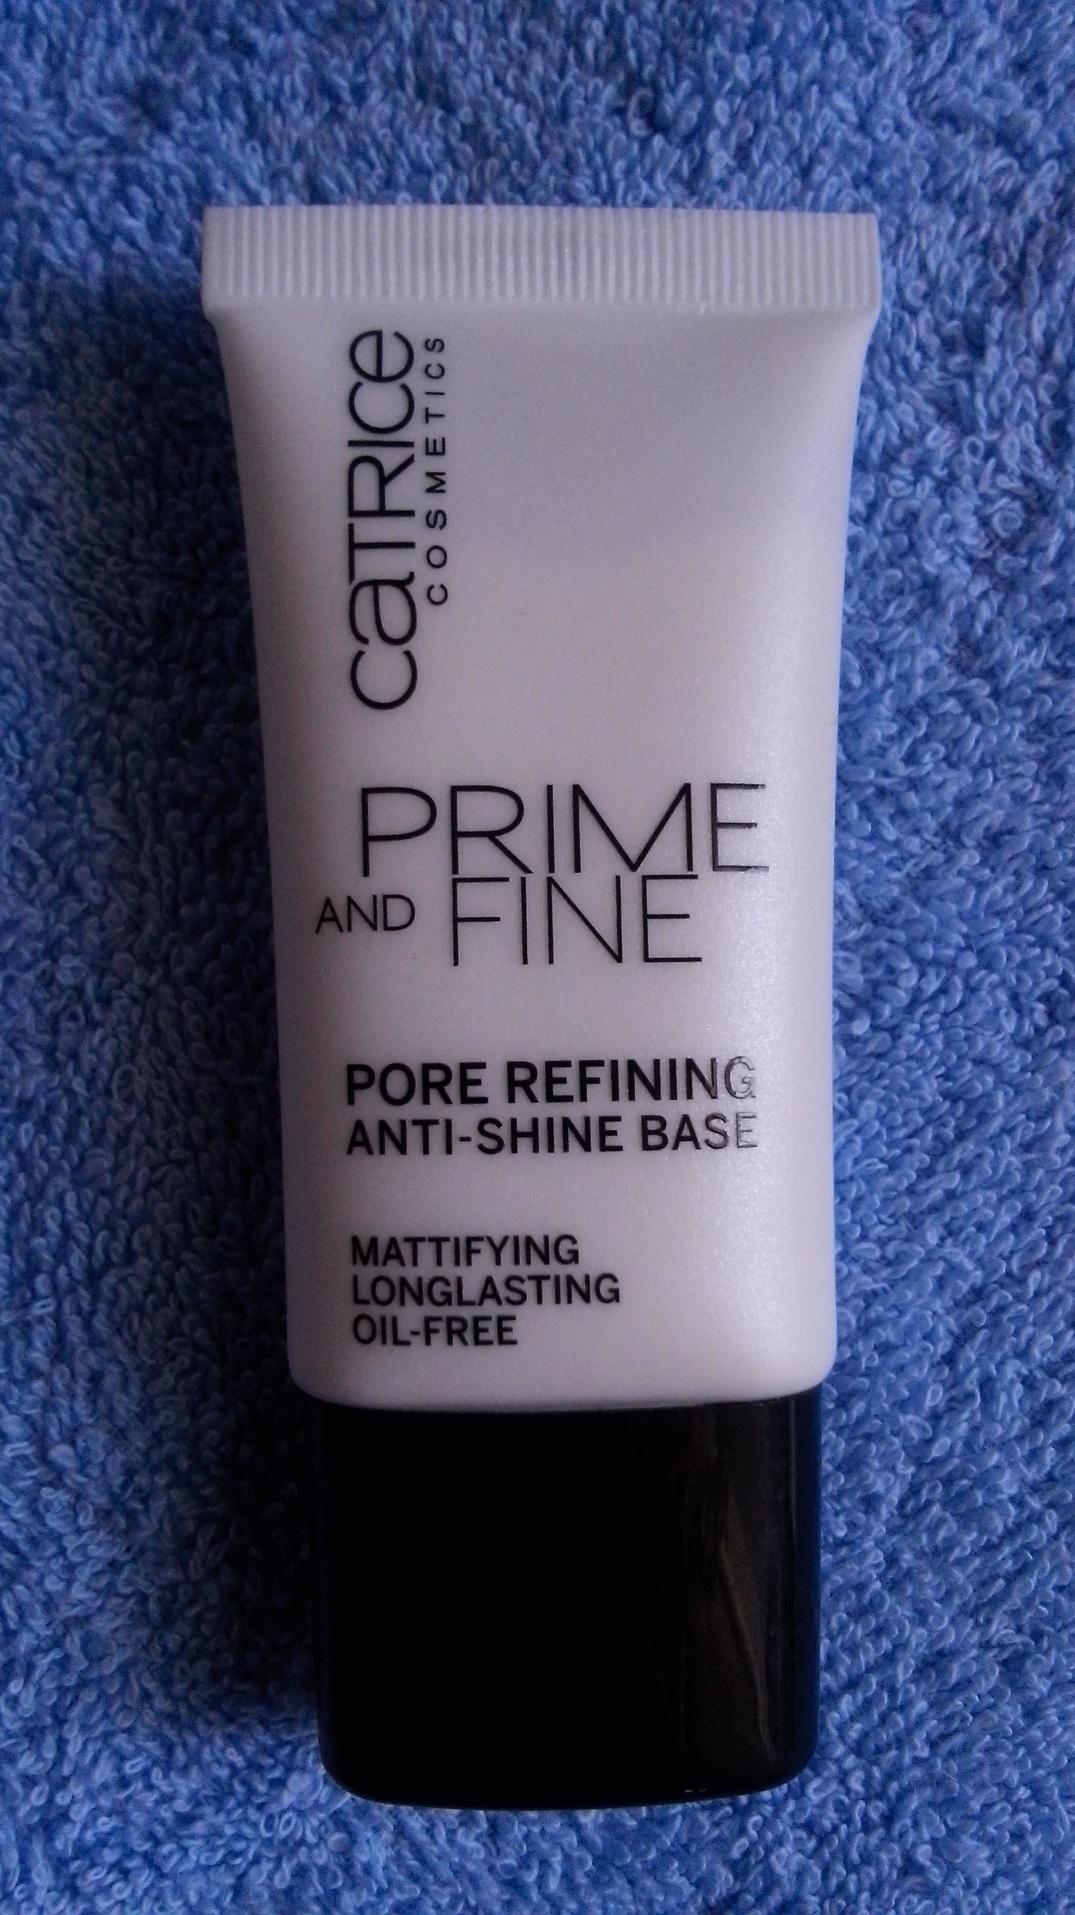 BEAUTY REVIEW: Catrice and Eyebrow Palladio Gel Primer